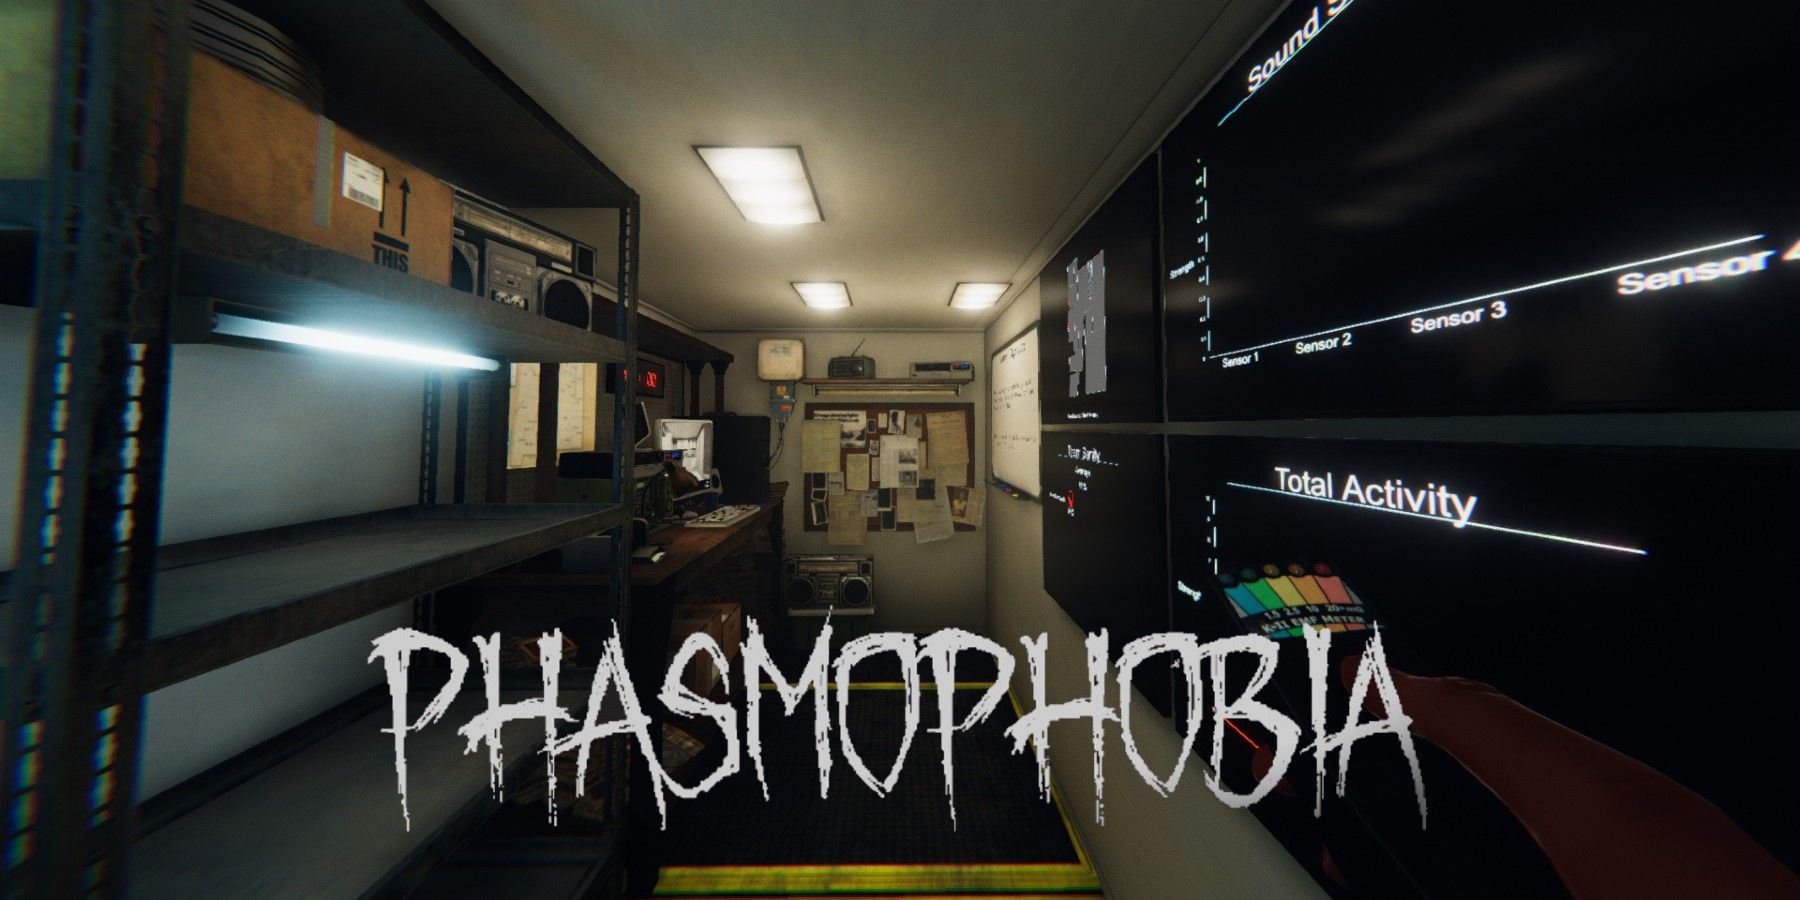 phasmophobia truck and title